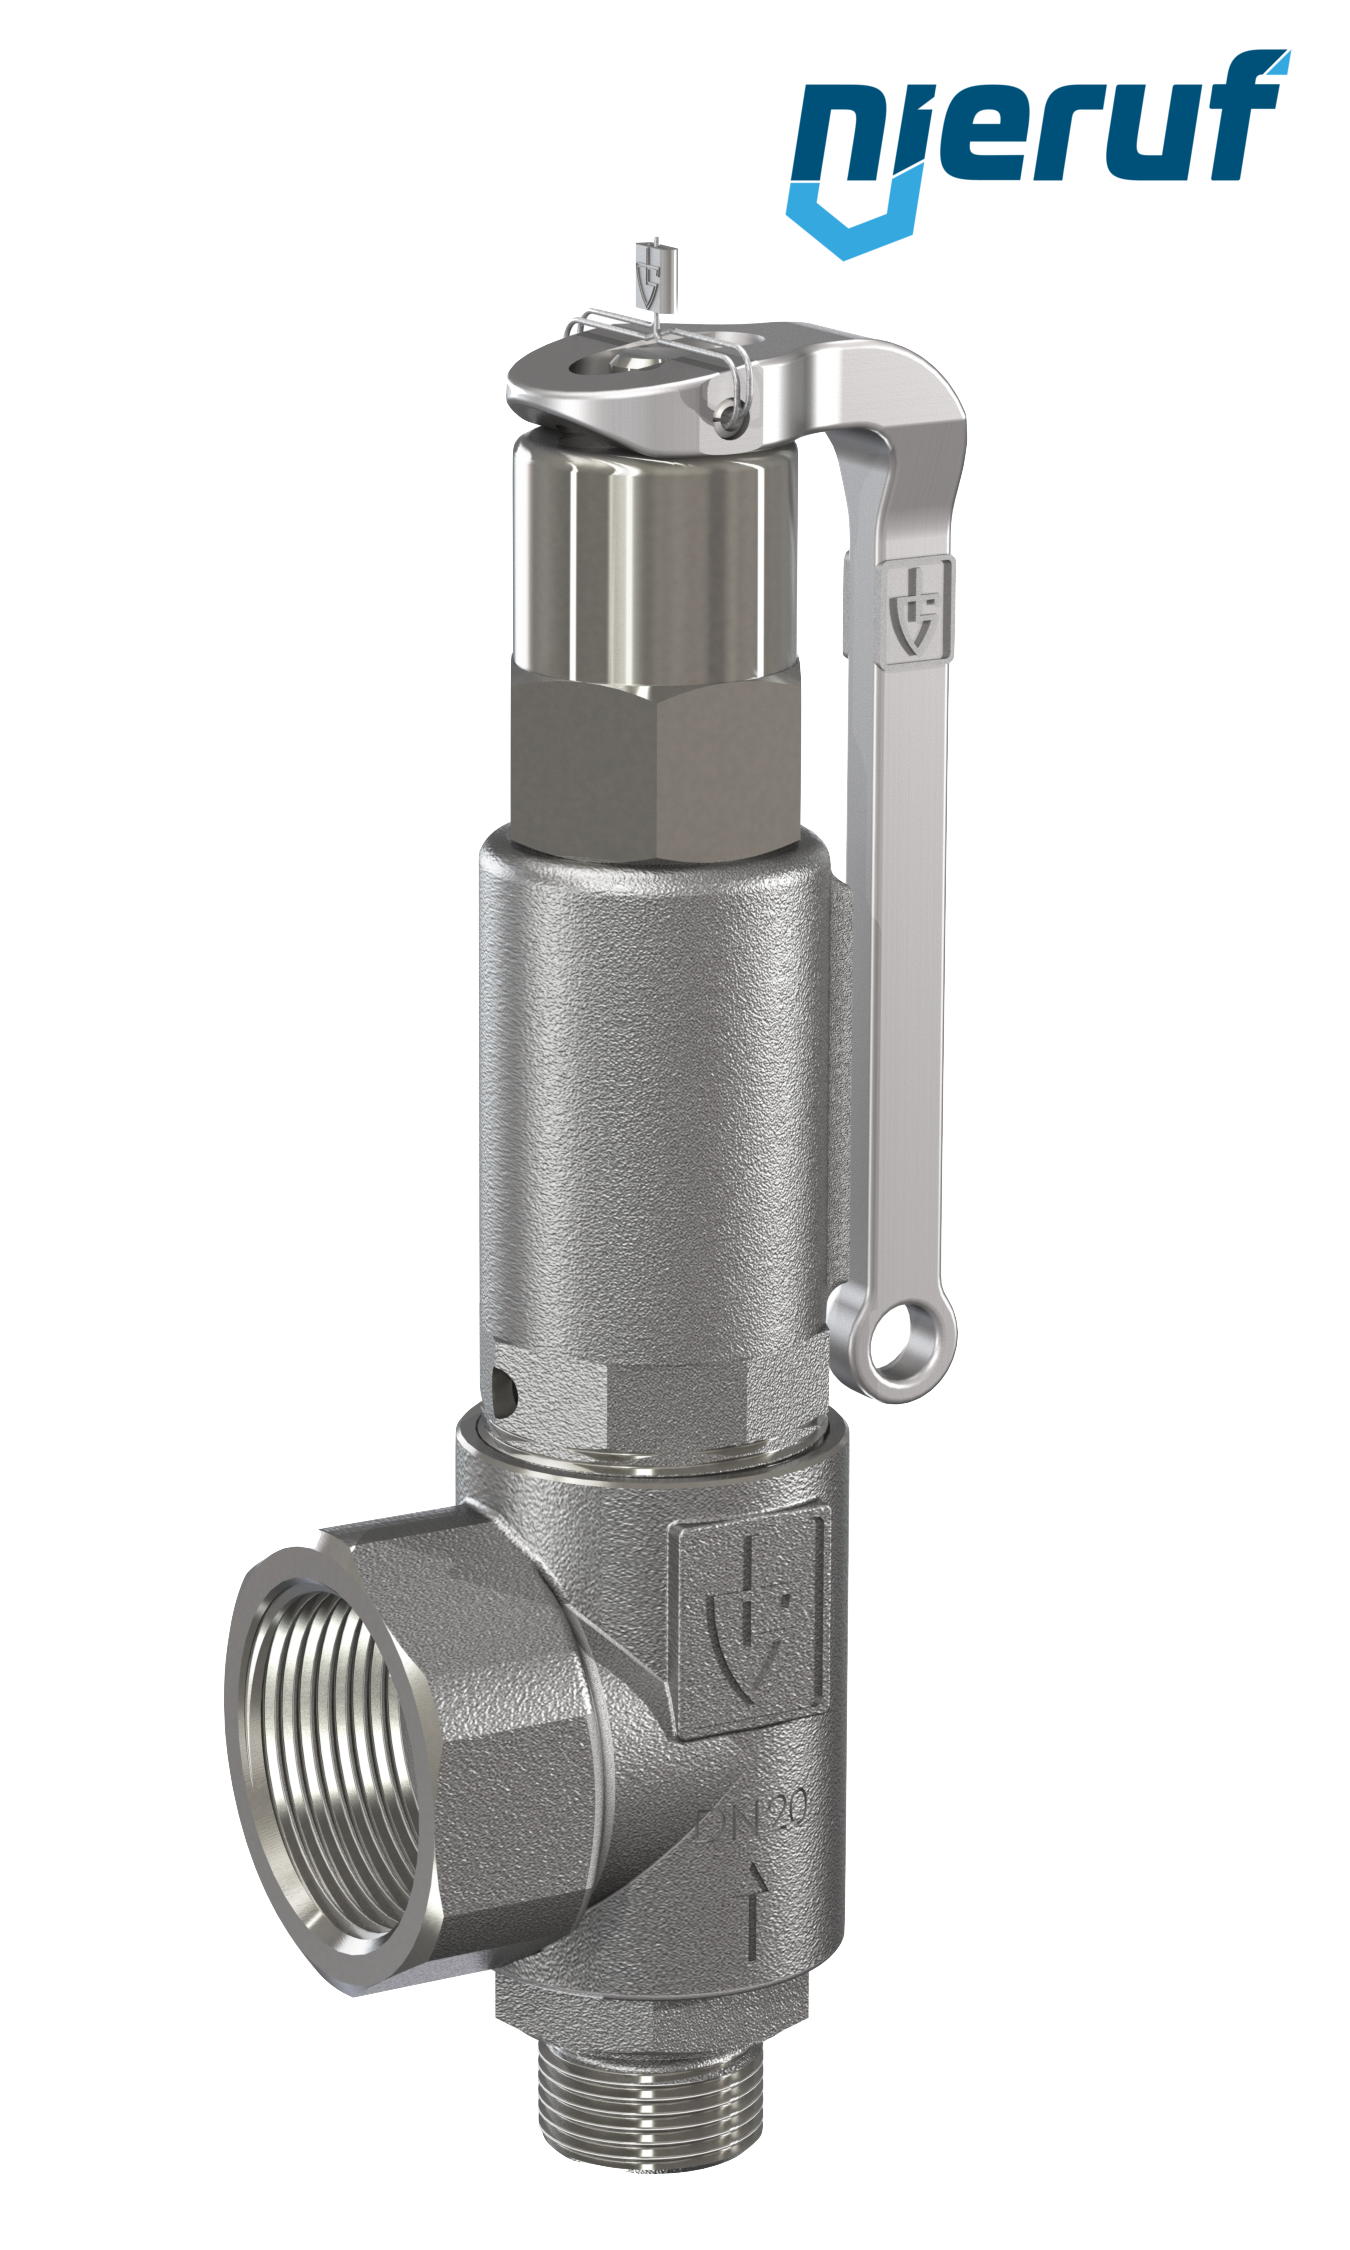 safety valve 3/4" m  x 1 1/4" fm SV05 neutral liquid media, stainless steel EPDM, with lever